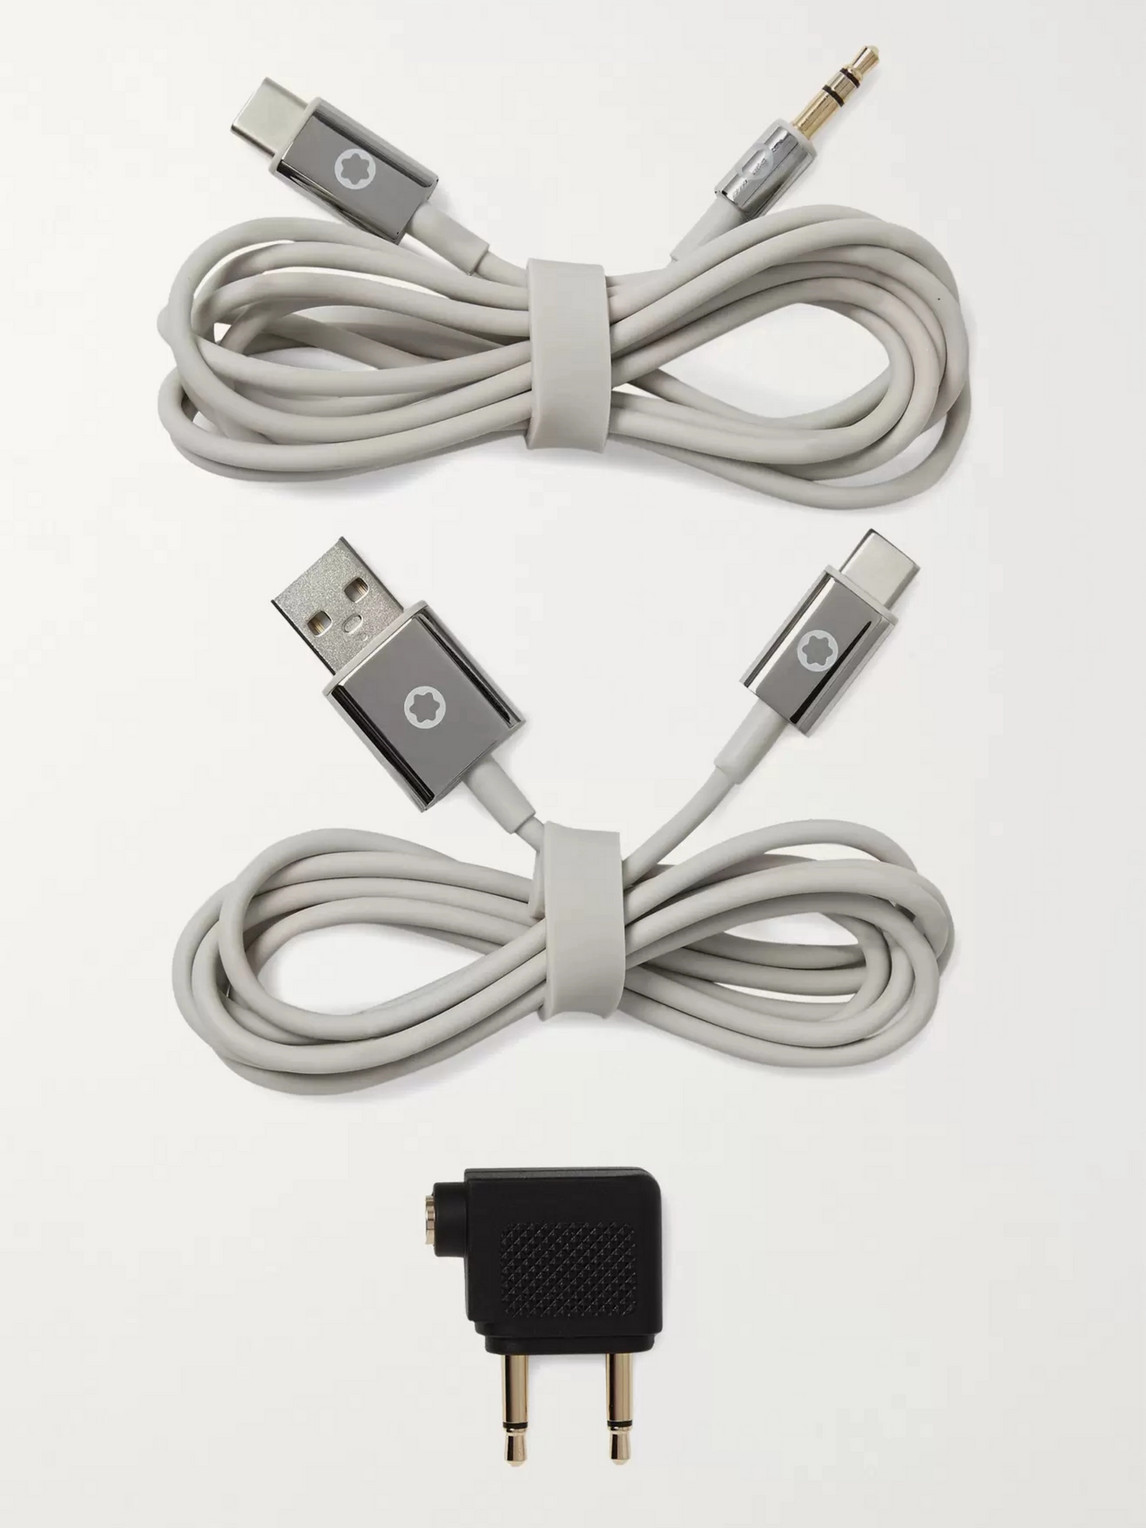 Montblanc Mb 01 Travel Charger And Cable Set In Grey